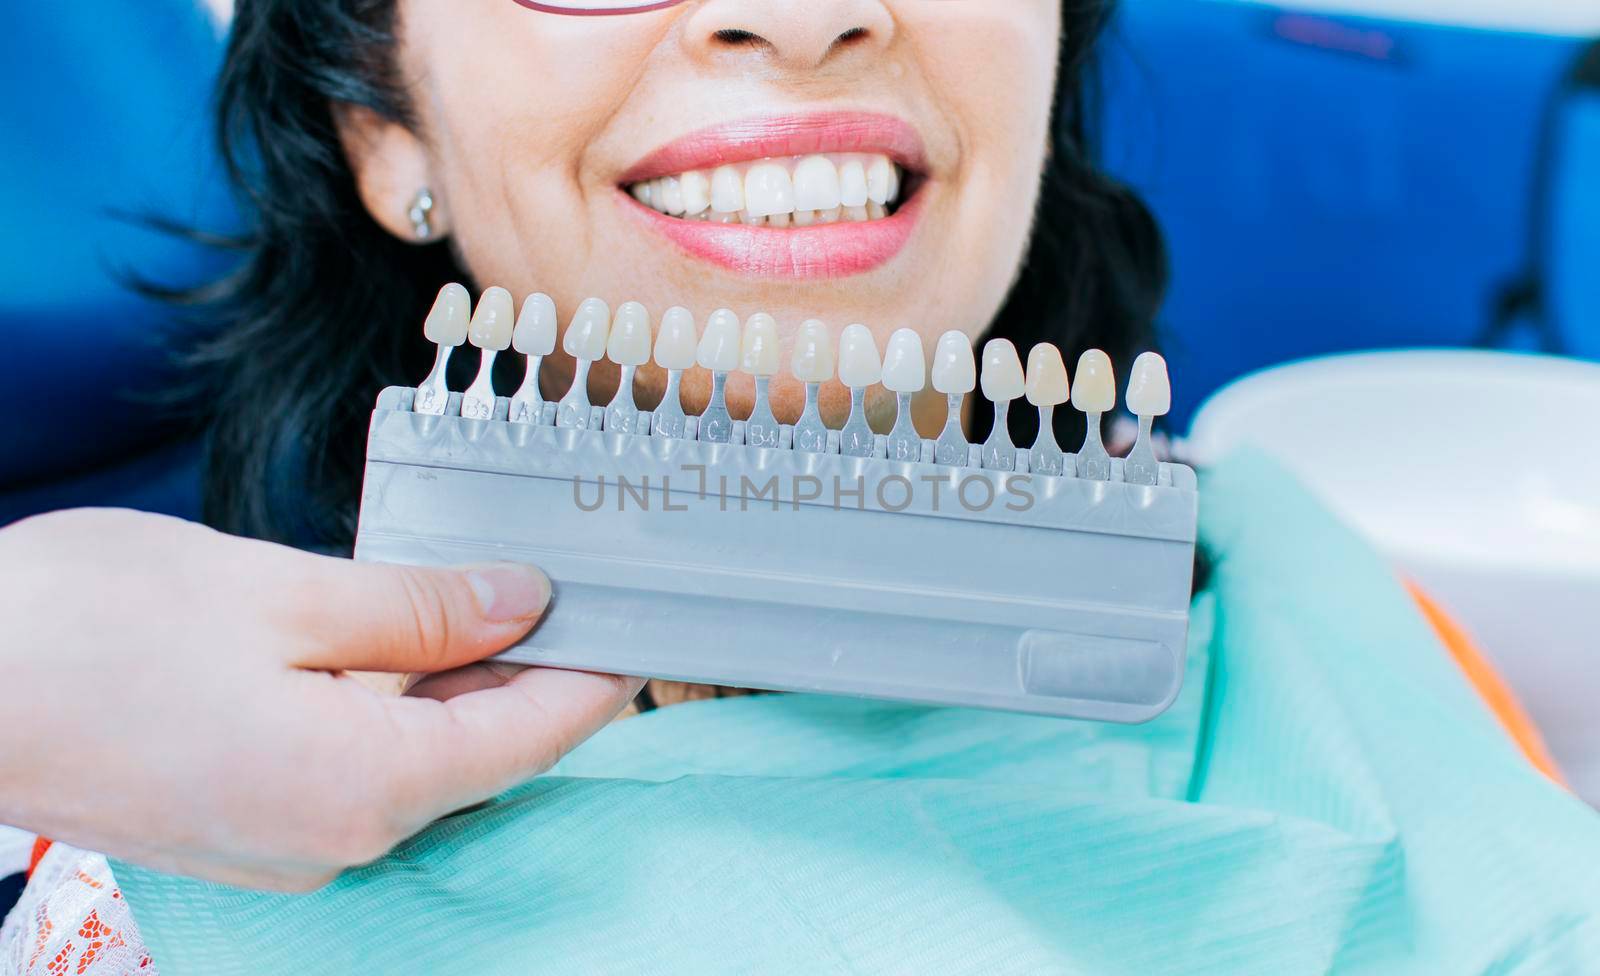 Cosmetological teeth whitening in a dental clinic, selection of the tone of the implant tooth, Woman Holding Set Of Implants With Various Shades Of Tone, Smiling young woman.  by isaiphoto